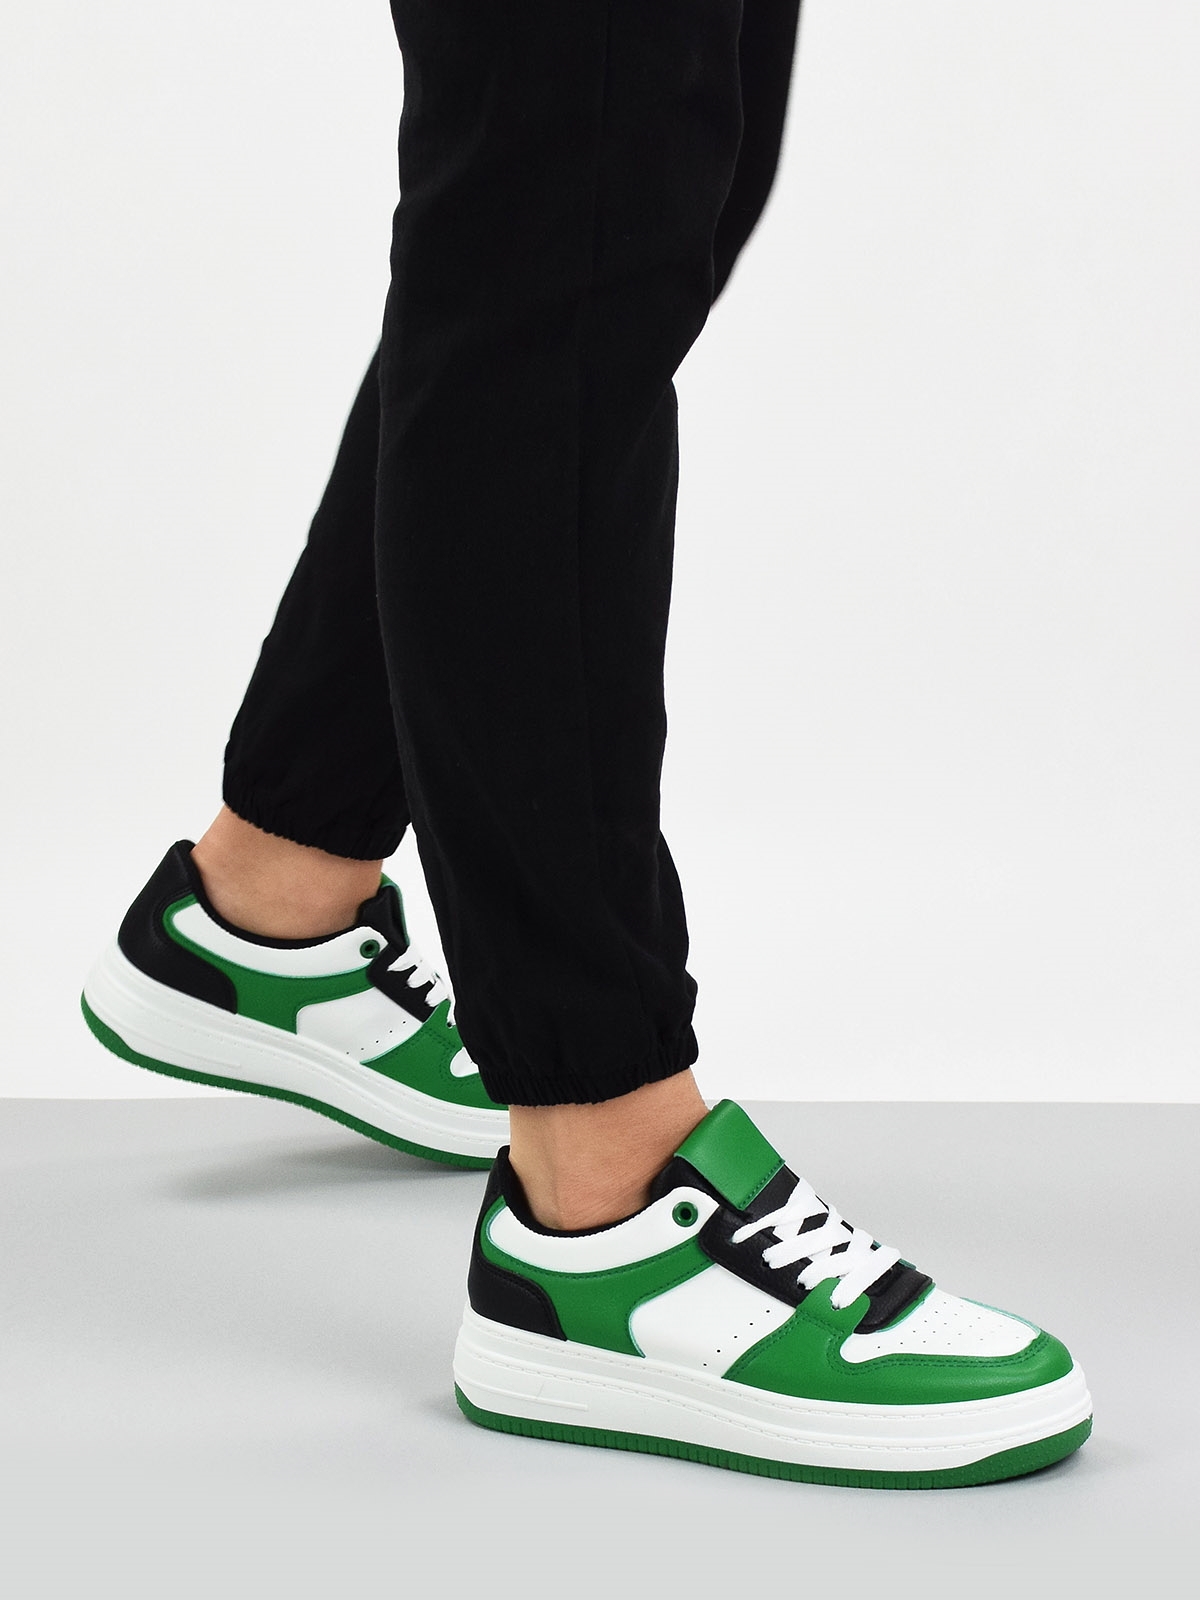 Lace up trainers in green & white